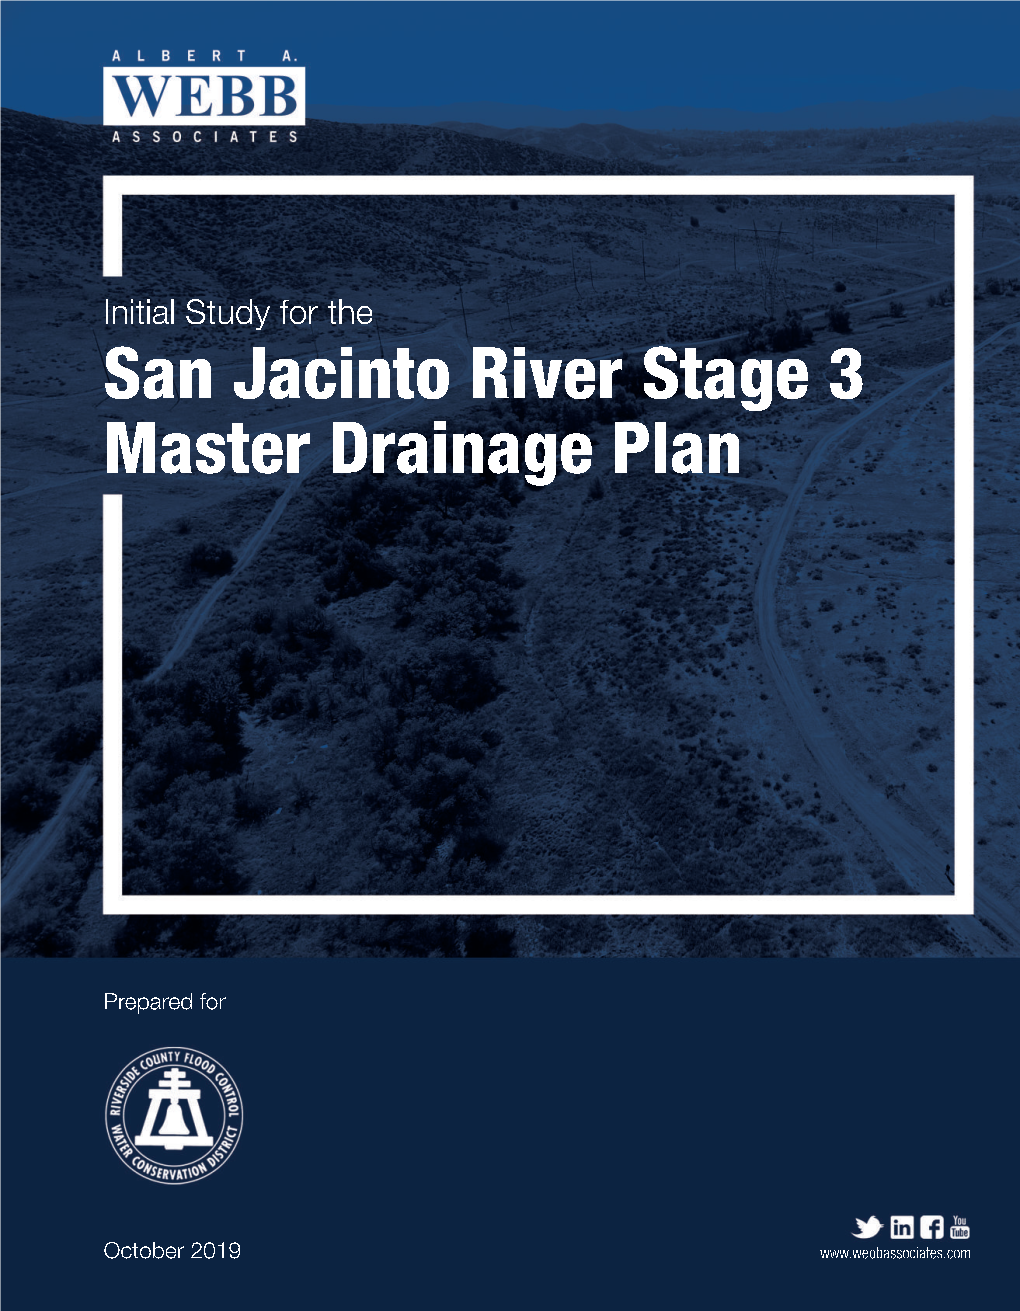 Initial Study for the San Jacinto River Stage 3 Master Drainage Plan